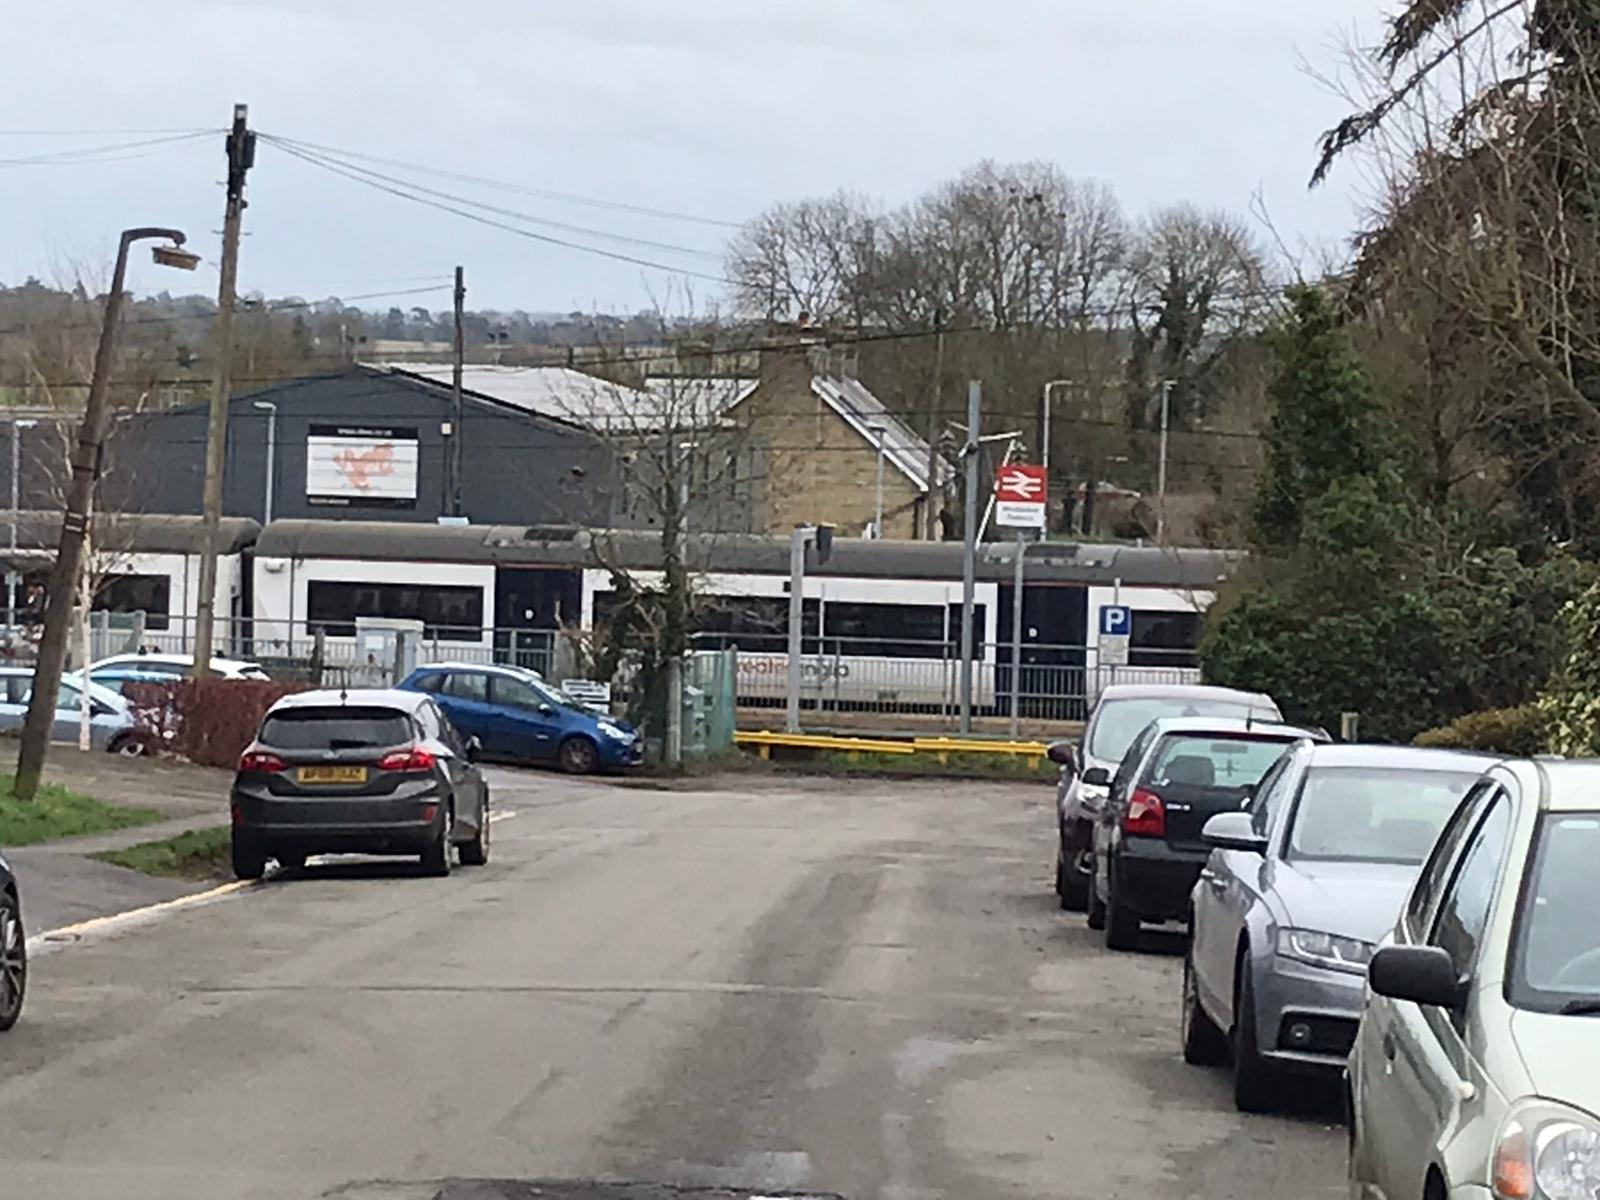 Parking at Whittlesford Station causes a parking misery for residents as does many of the other parking problems in the South Cambs.